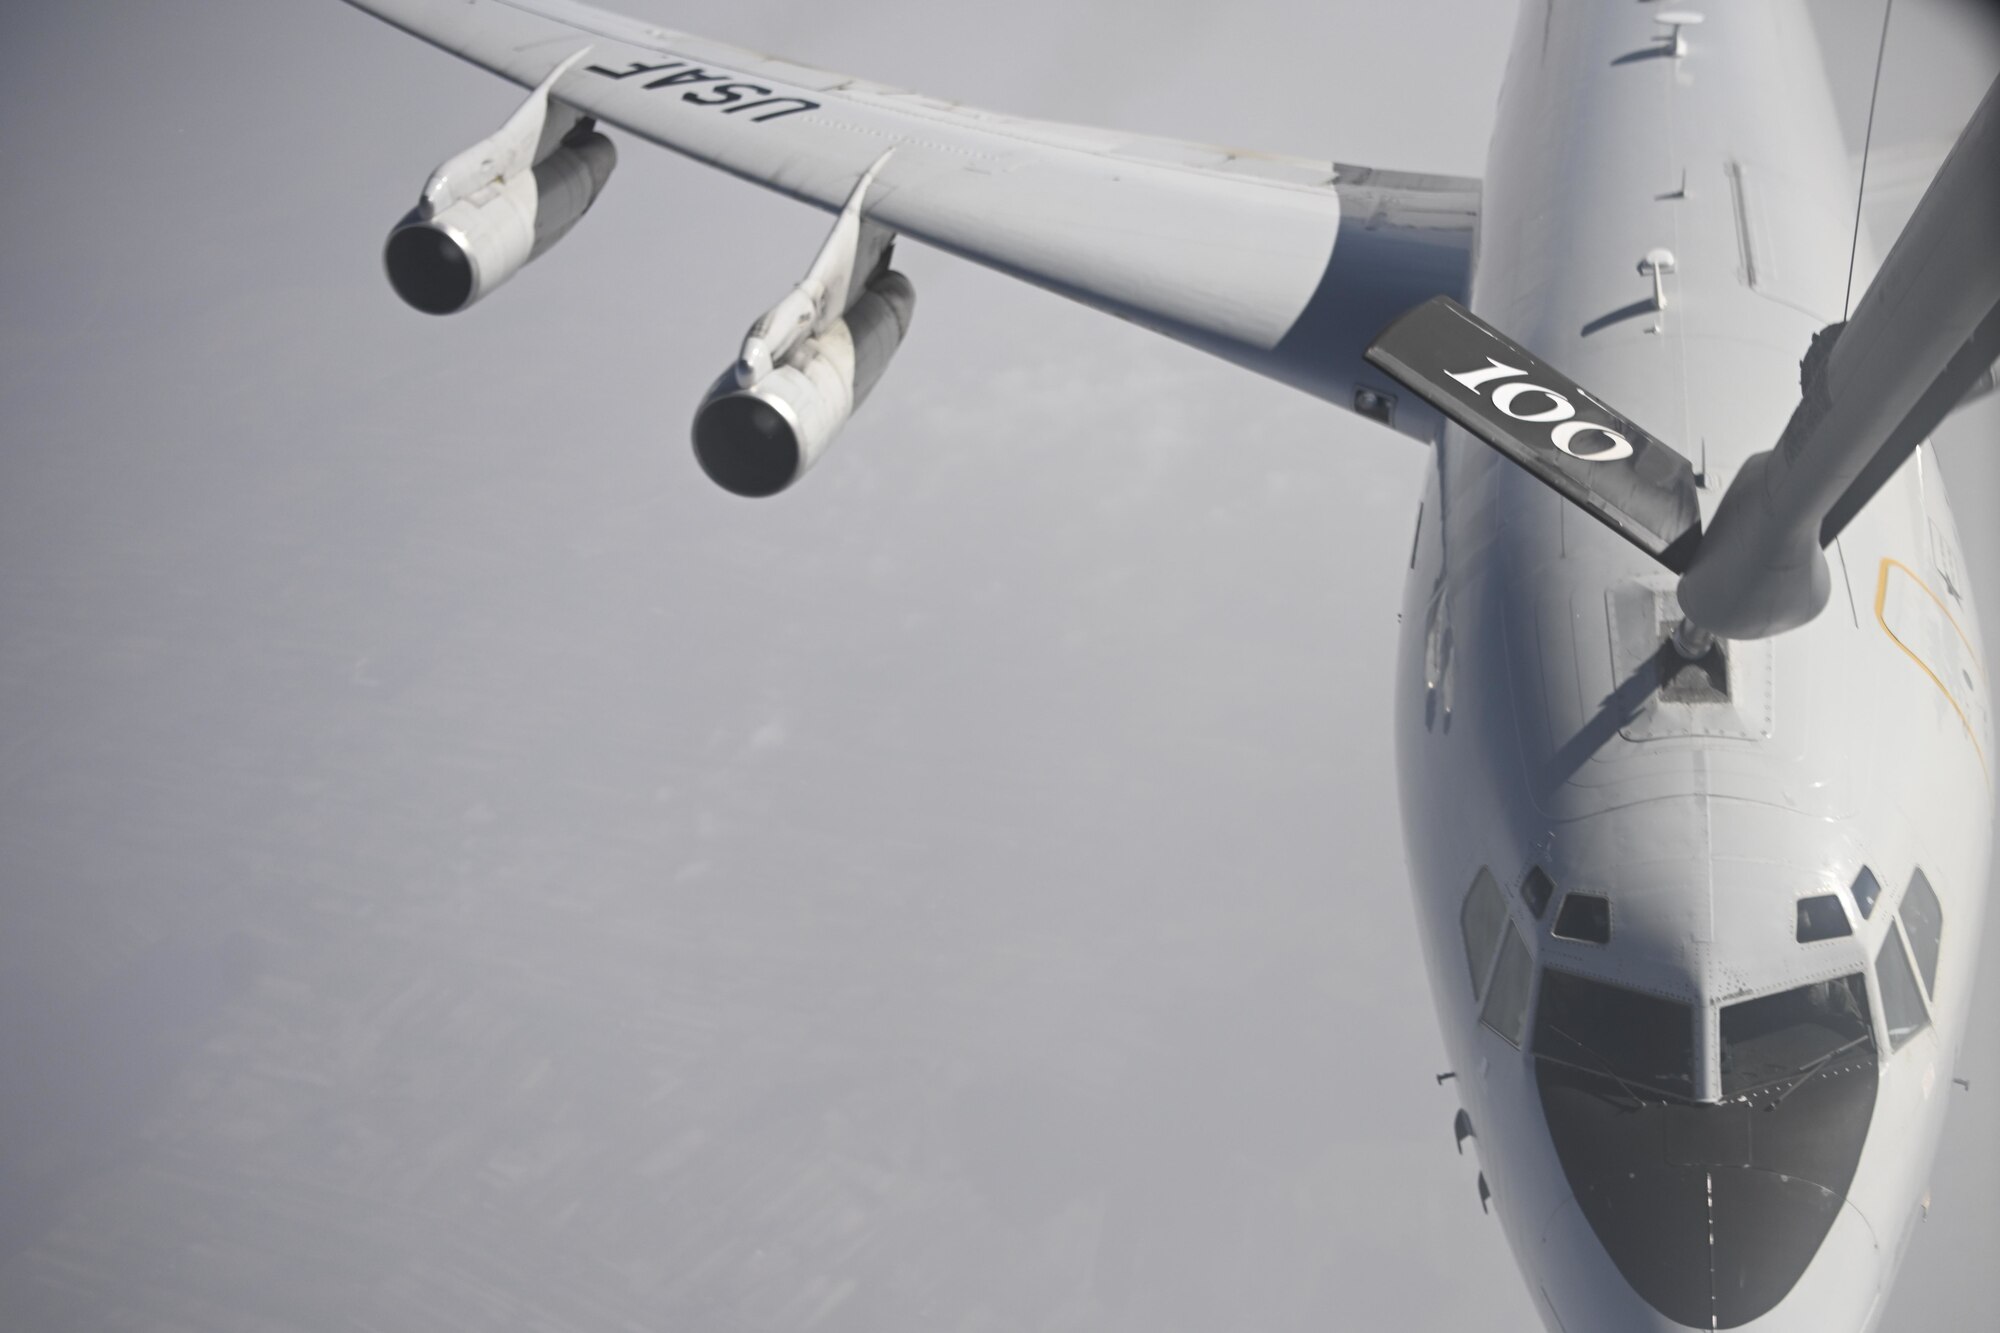 A U.S. Air Force KC-135 Stratotanker aircraft assigned to the 100th Air Refueling Wing, Royal Air Force Mildenhall, England, delivers fuel to an E-8C Joint STARS aircraft over Poland, March 30, 2022. The 100th ARW supports the U.S. Air Force's global reach mission by extending the range of aircraft in Europe and Africa. (U.S. Air Force photo by Senior Airman Joseph Barron)